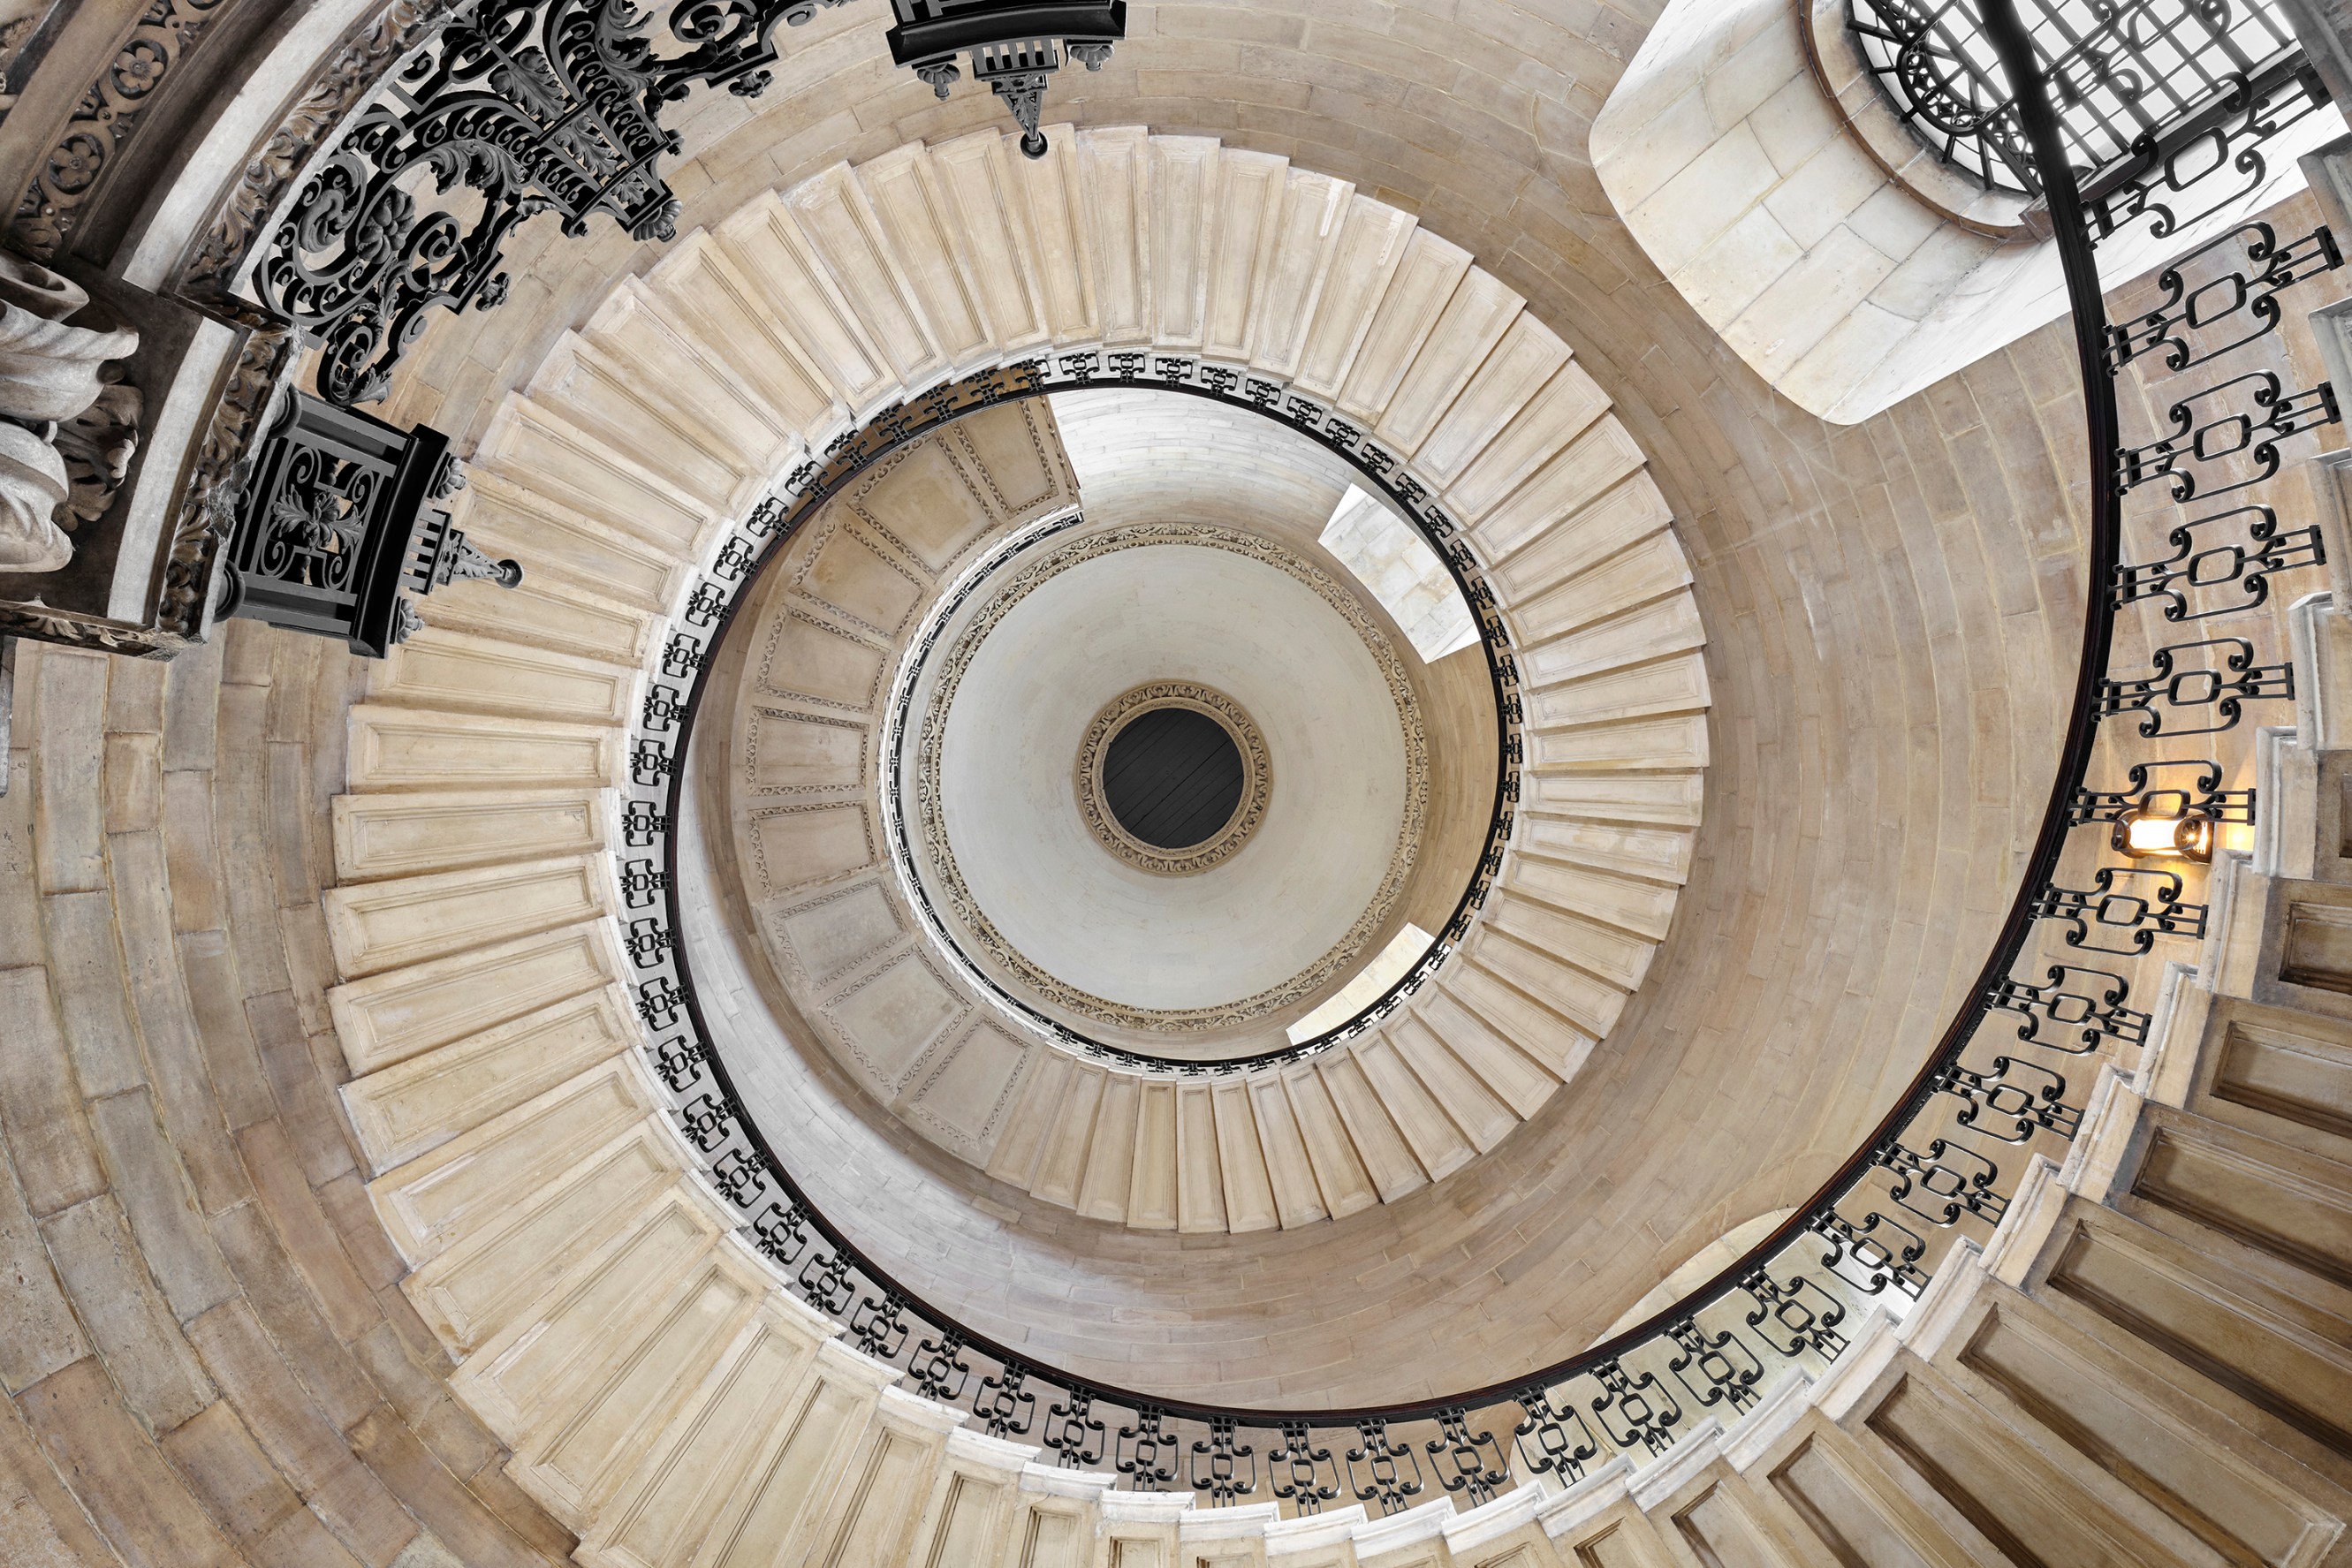 Aerial view of the famous Geometric Staircase in St. Paul's, designed by Sir Christopher Wren.